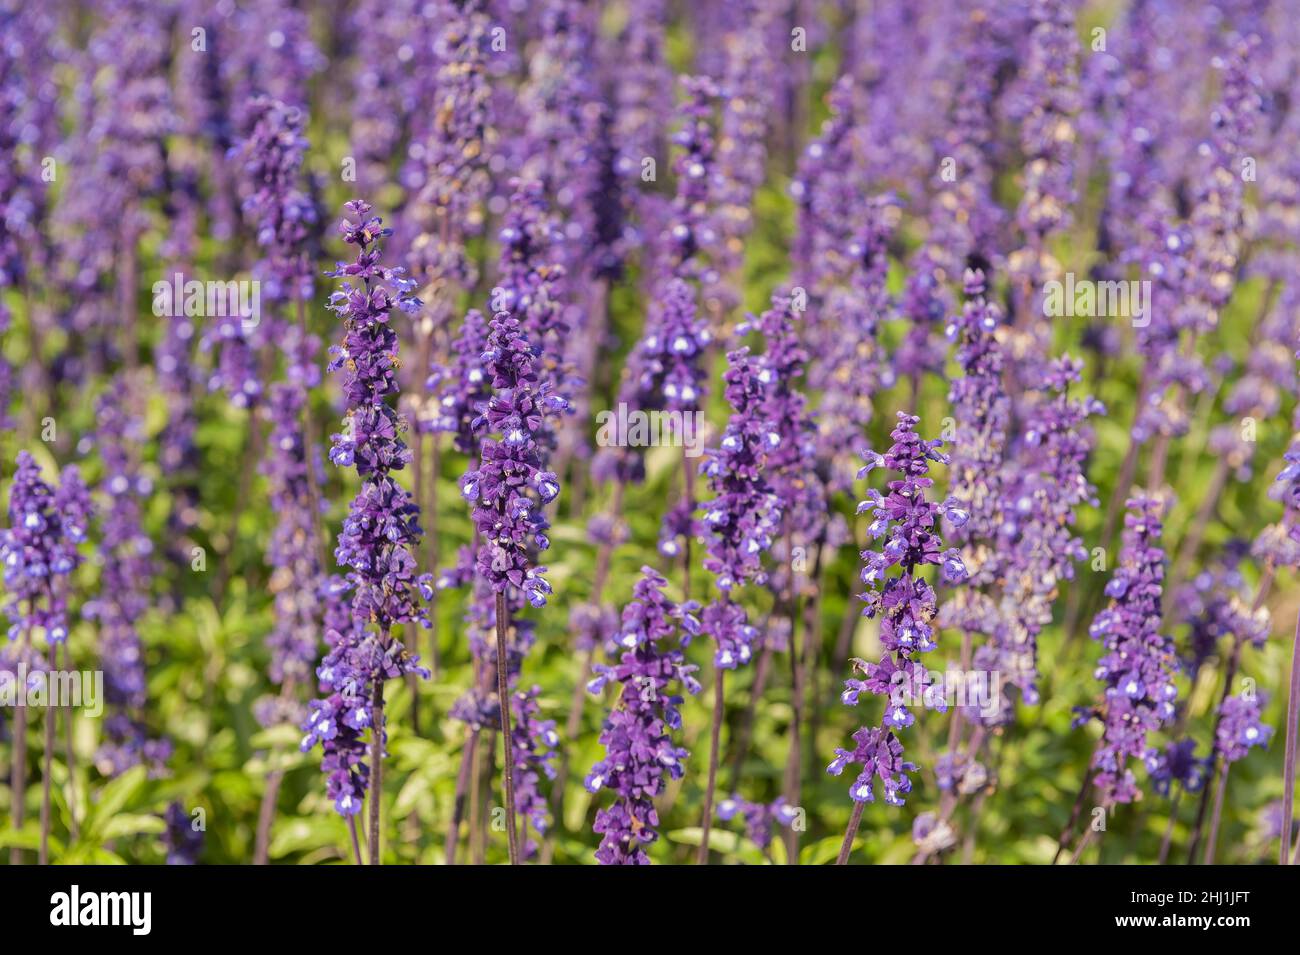 Salvia farinacea, Mealycup Sage, heather like with flowers on spikes densely arranged as tubular bloom Stock Photo